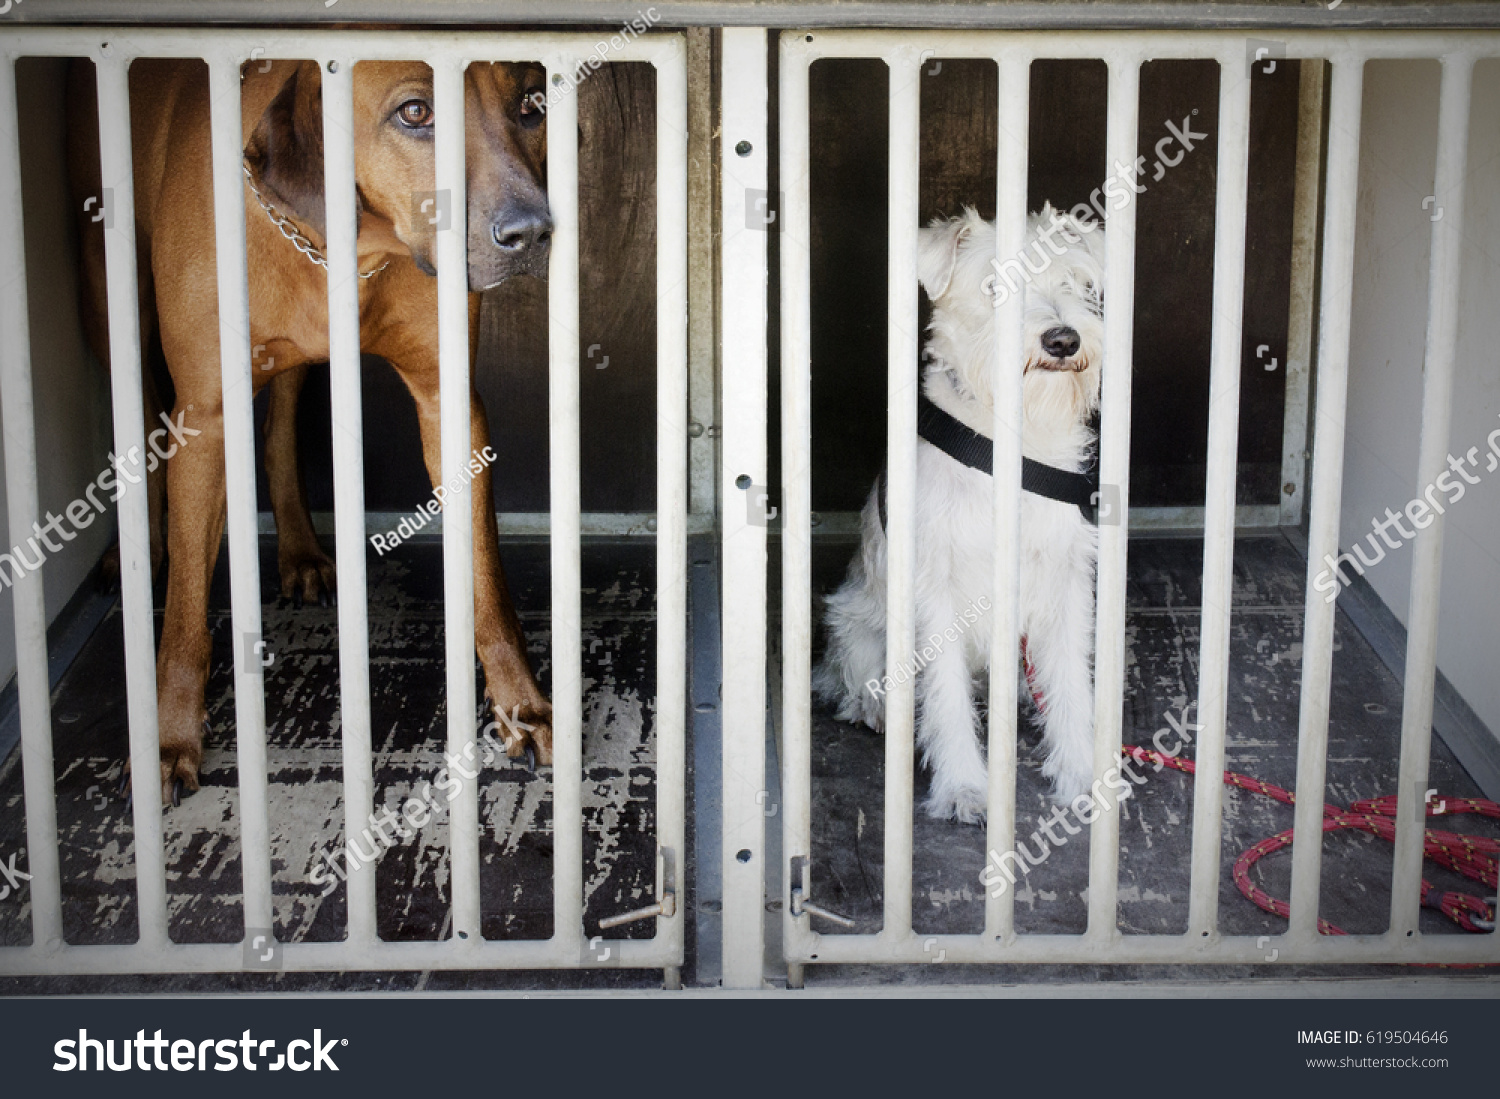 stock-photo-two-dogs-behind-of-the-prison-bars-619504646.jpg